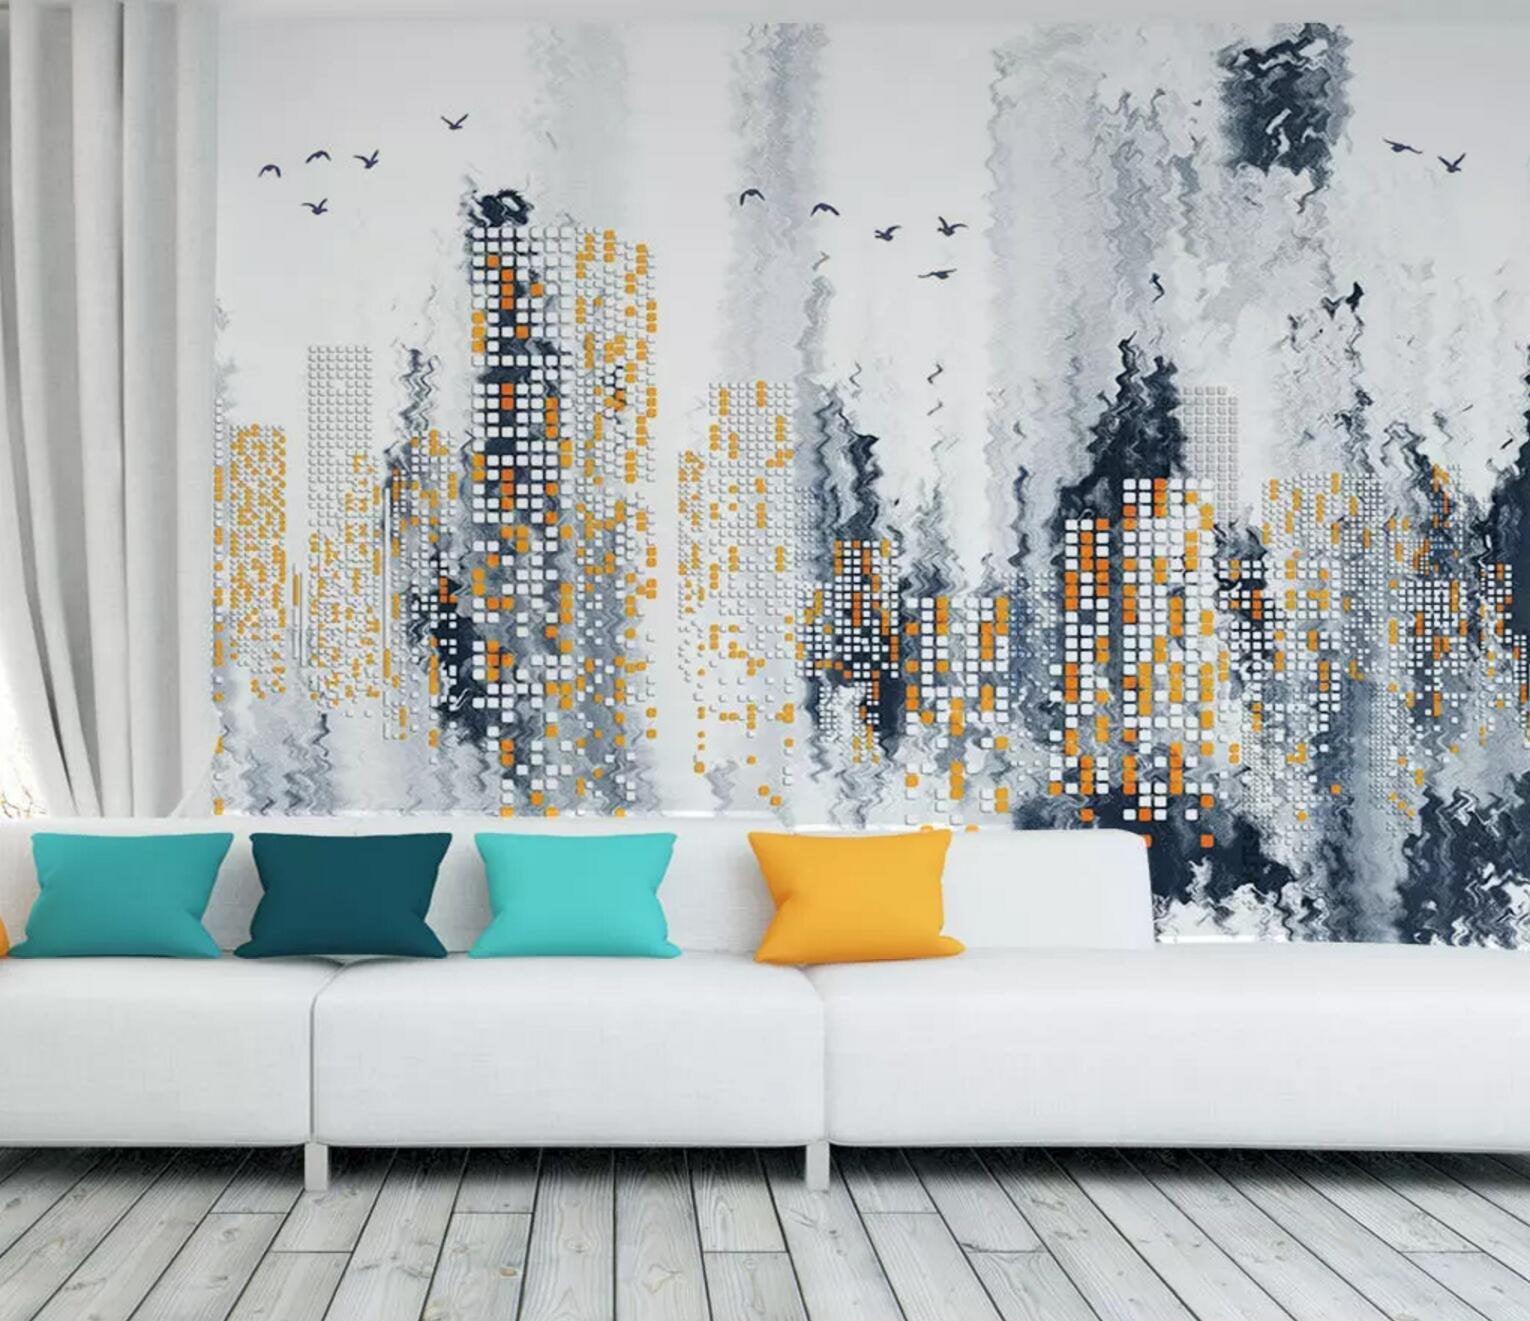 3D Abstract,Watercolor background,Gold,Urban architecture Wallpaper,Removable Self Adhesive Wallpaper, Wall Mural,Vintage art,Peel and Stick- Jess Art Decoration